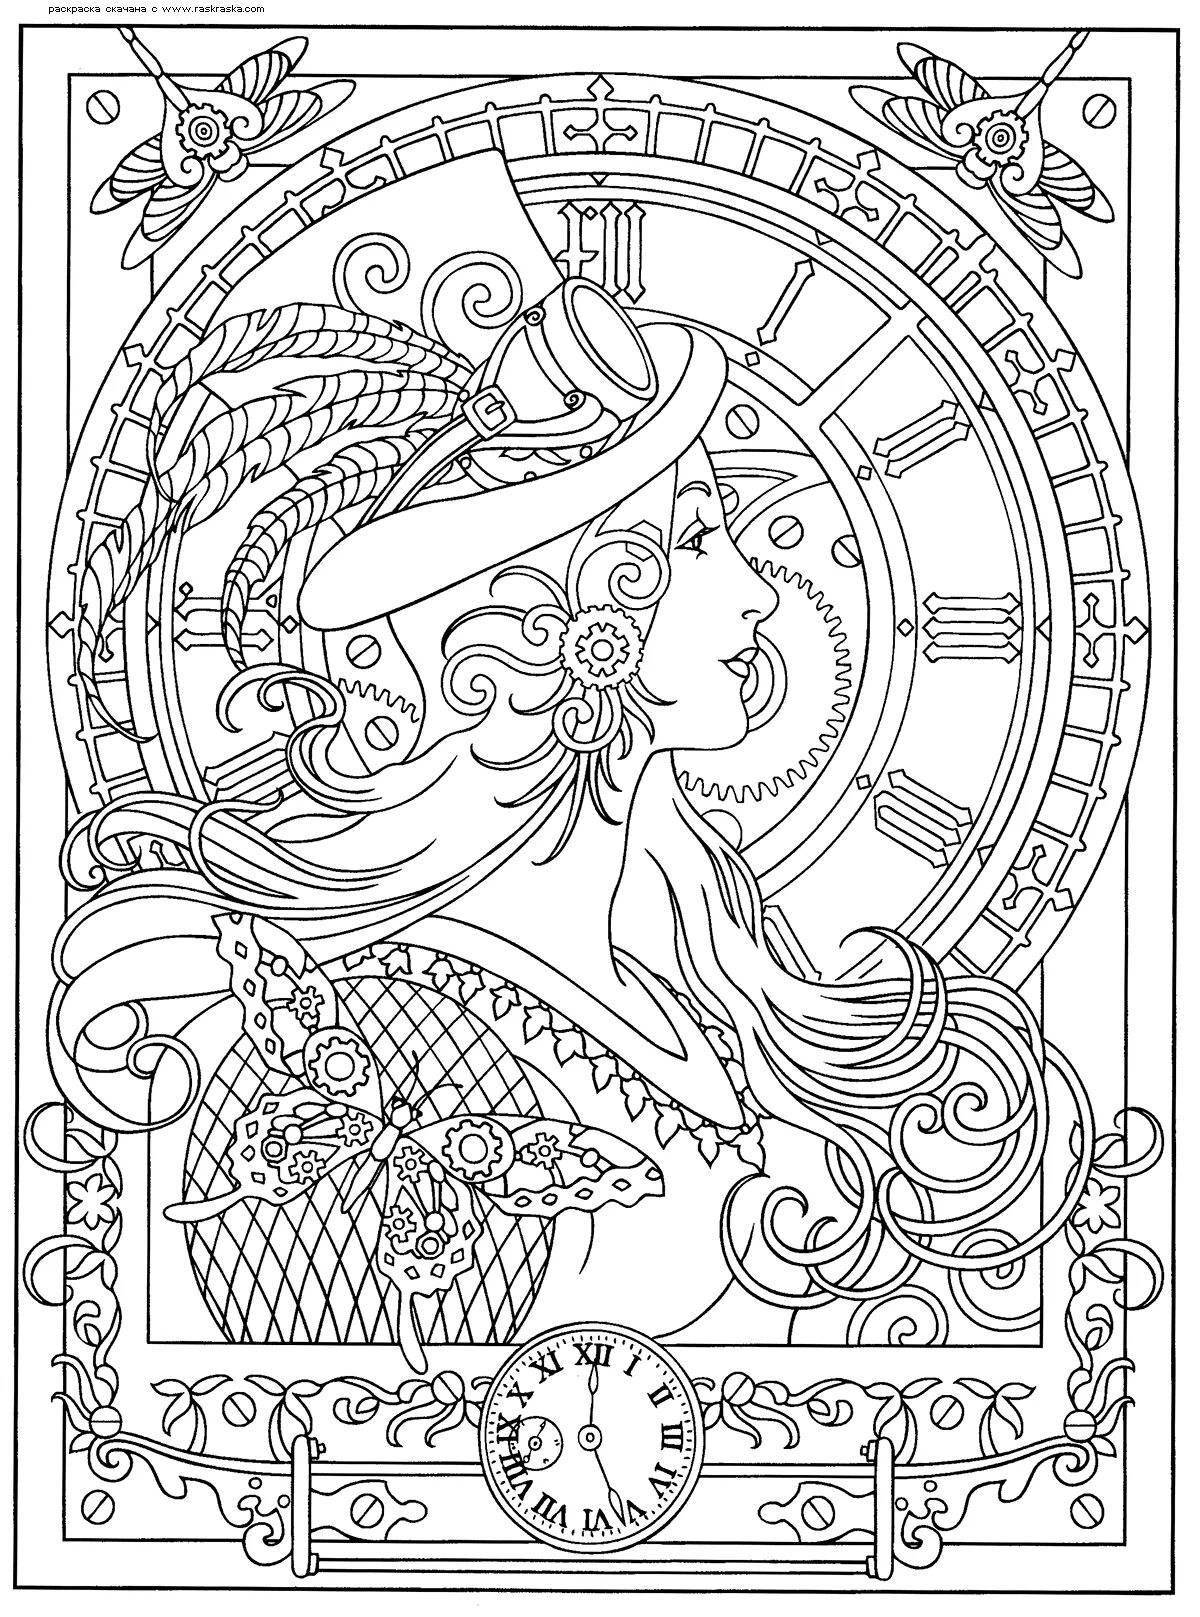 Glowing steampunk coloring page